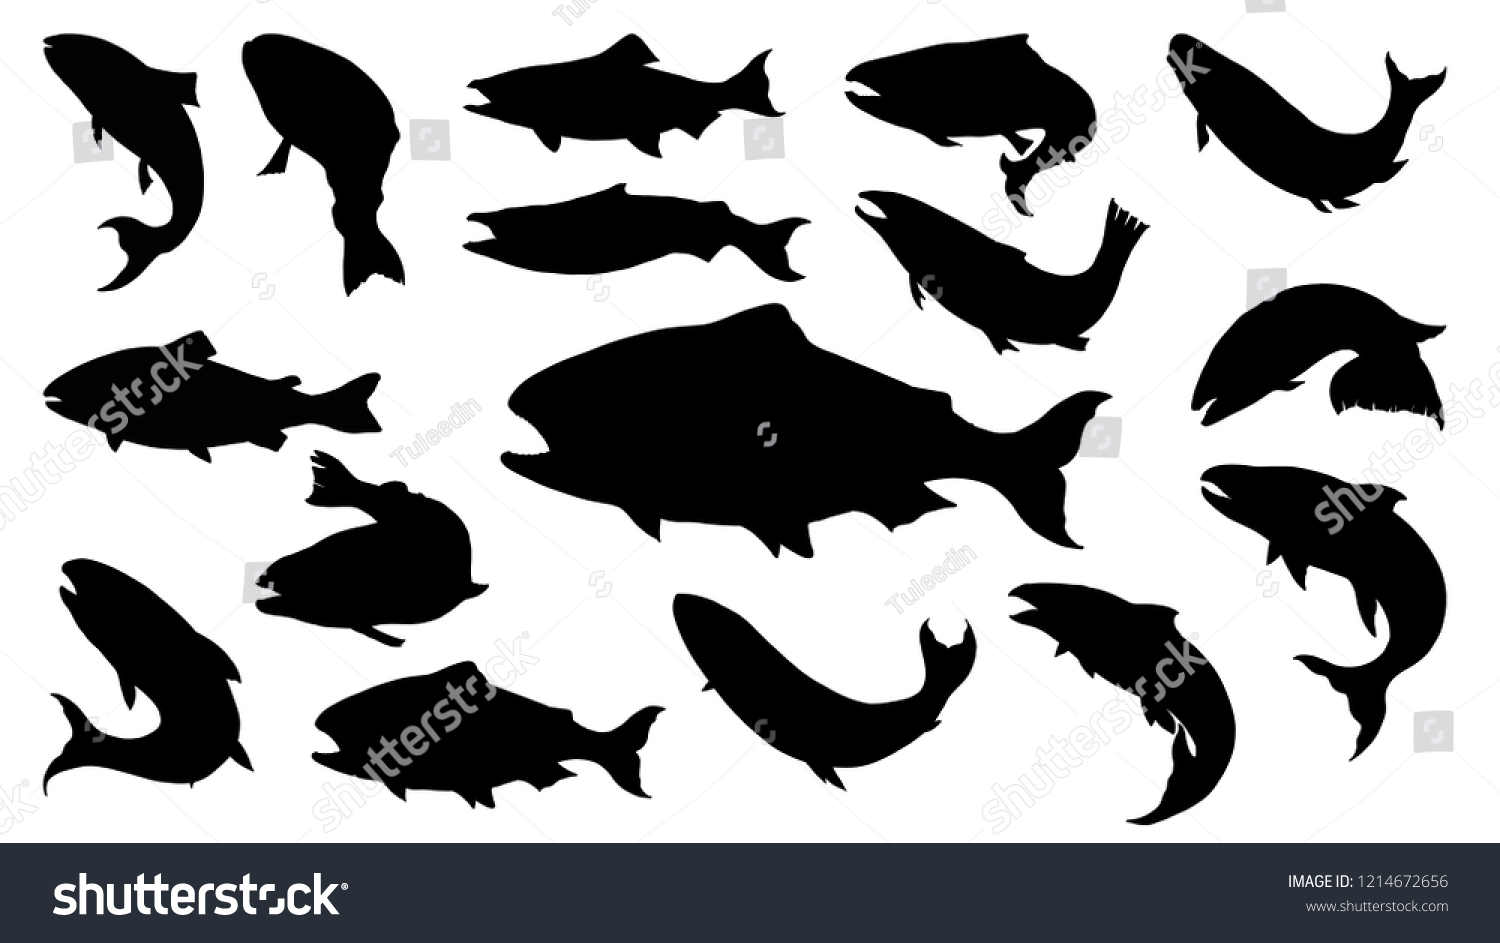 1,735 Jumping trout silhouette Images, Stock Photos & Vectors ...